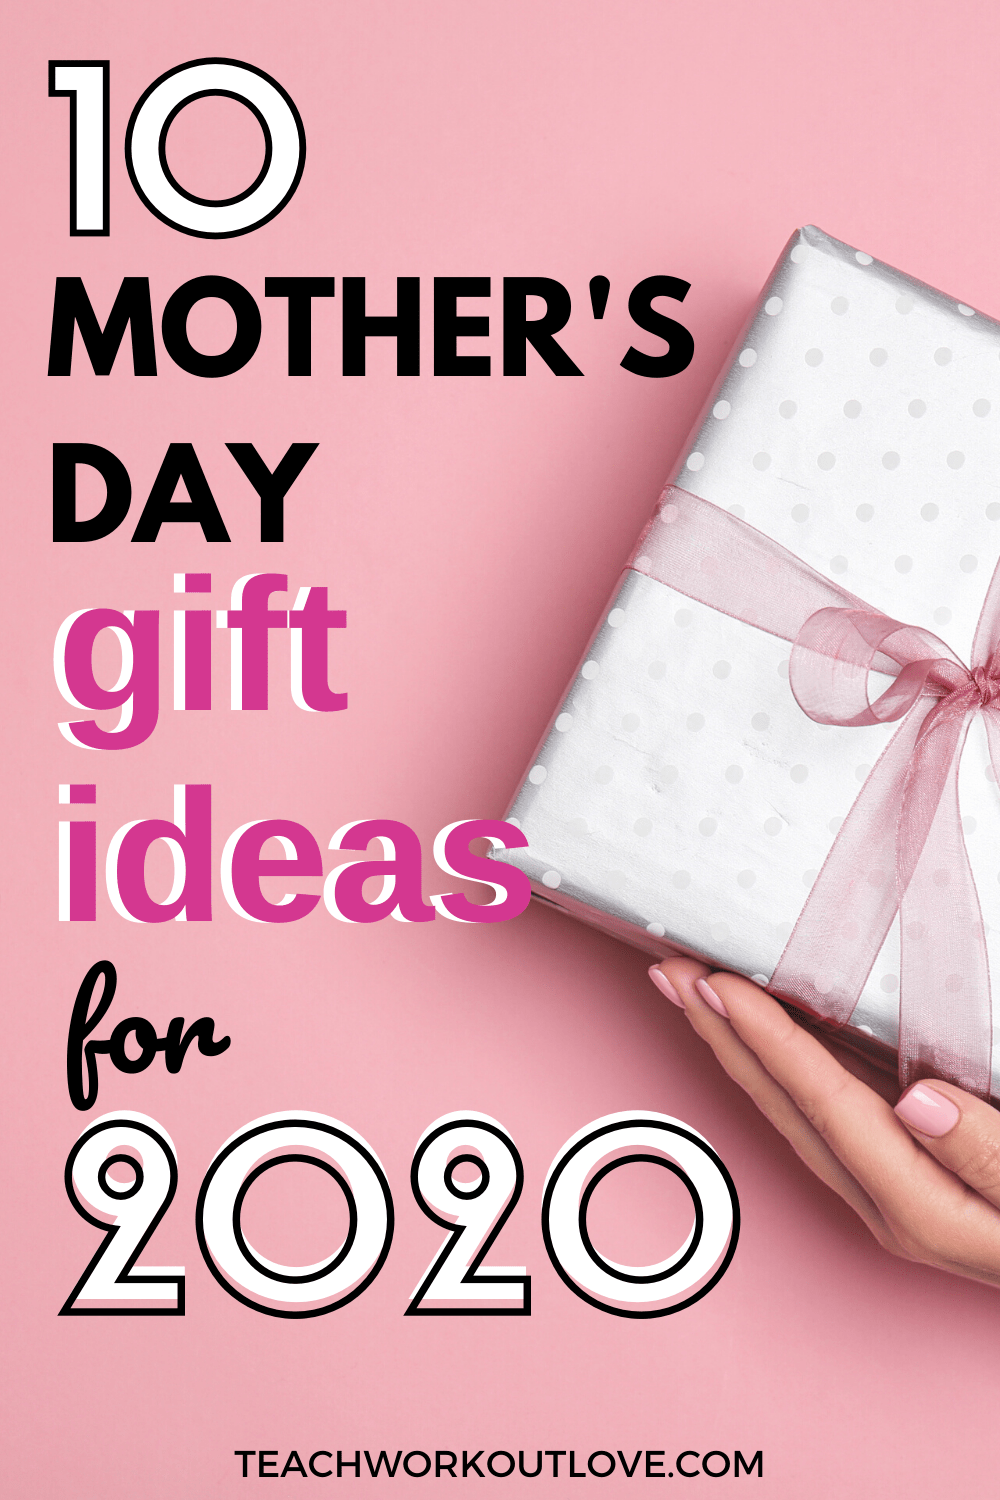 Mother's Day is one of the most important gift days of the year. We've prepared a great list of thoughtful Mother's Day gifts to give to your loved women.